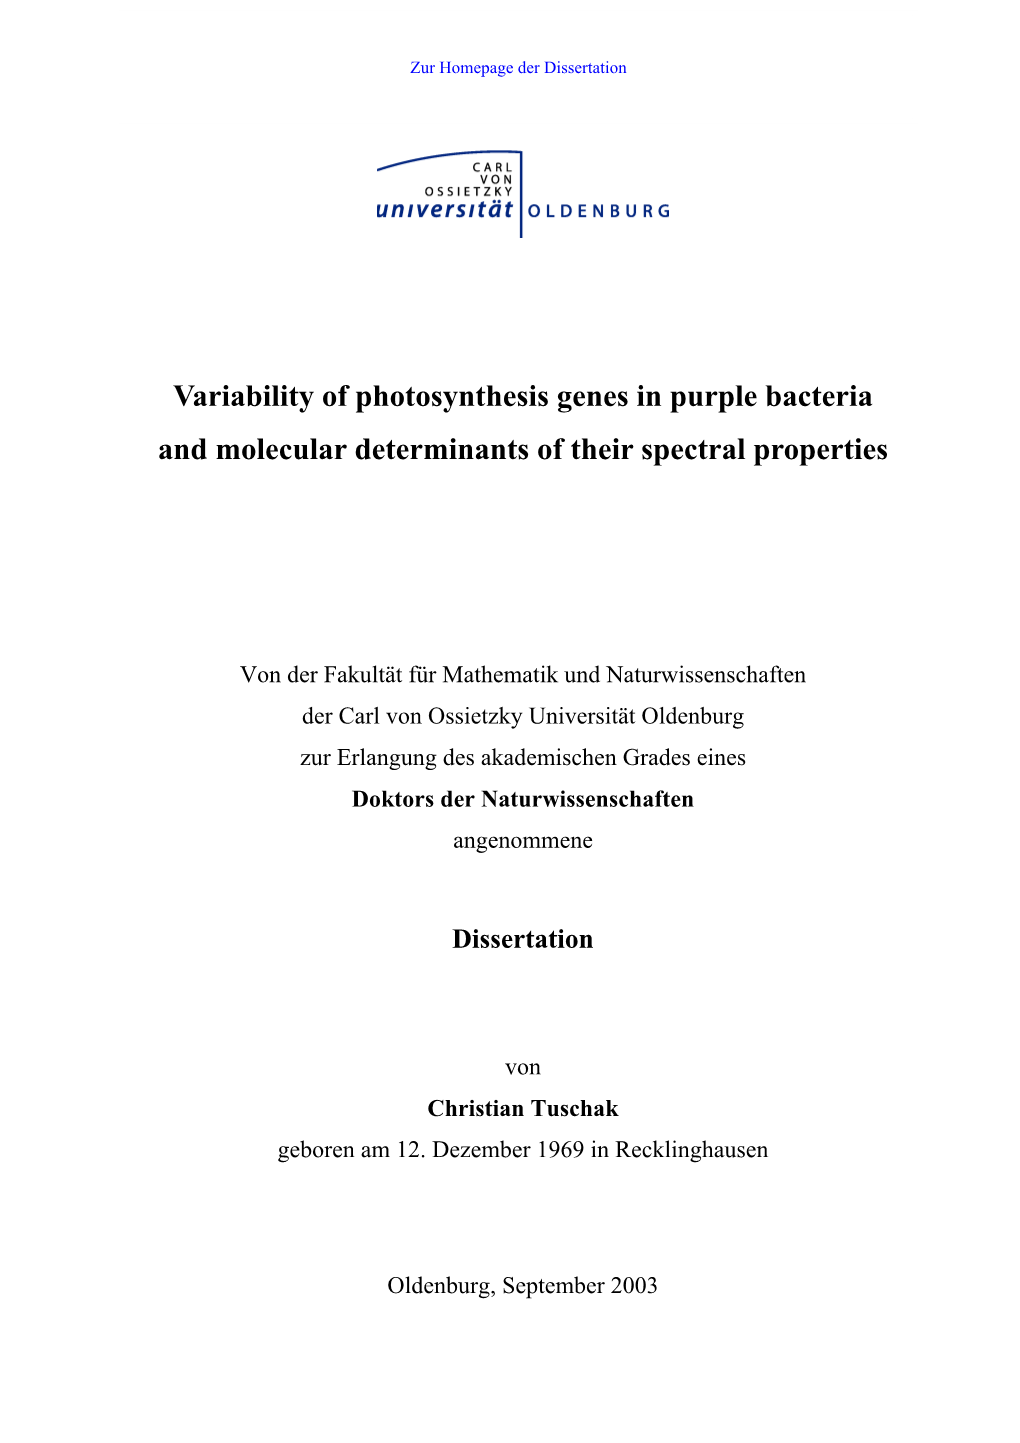 Variability of Photosynthesis Genes in Purple Bacteria and Molecular Determinants of Their Spectral Properties